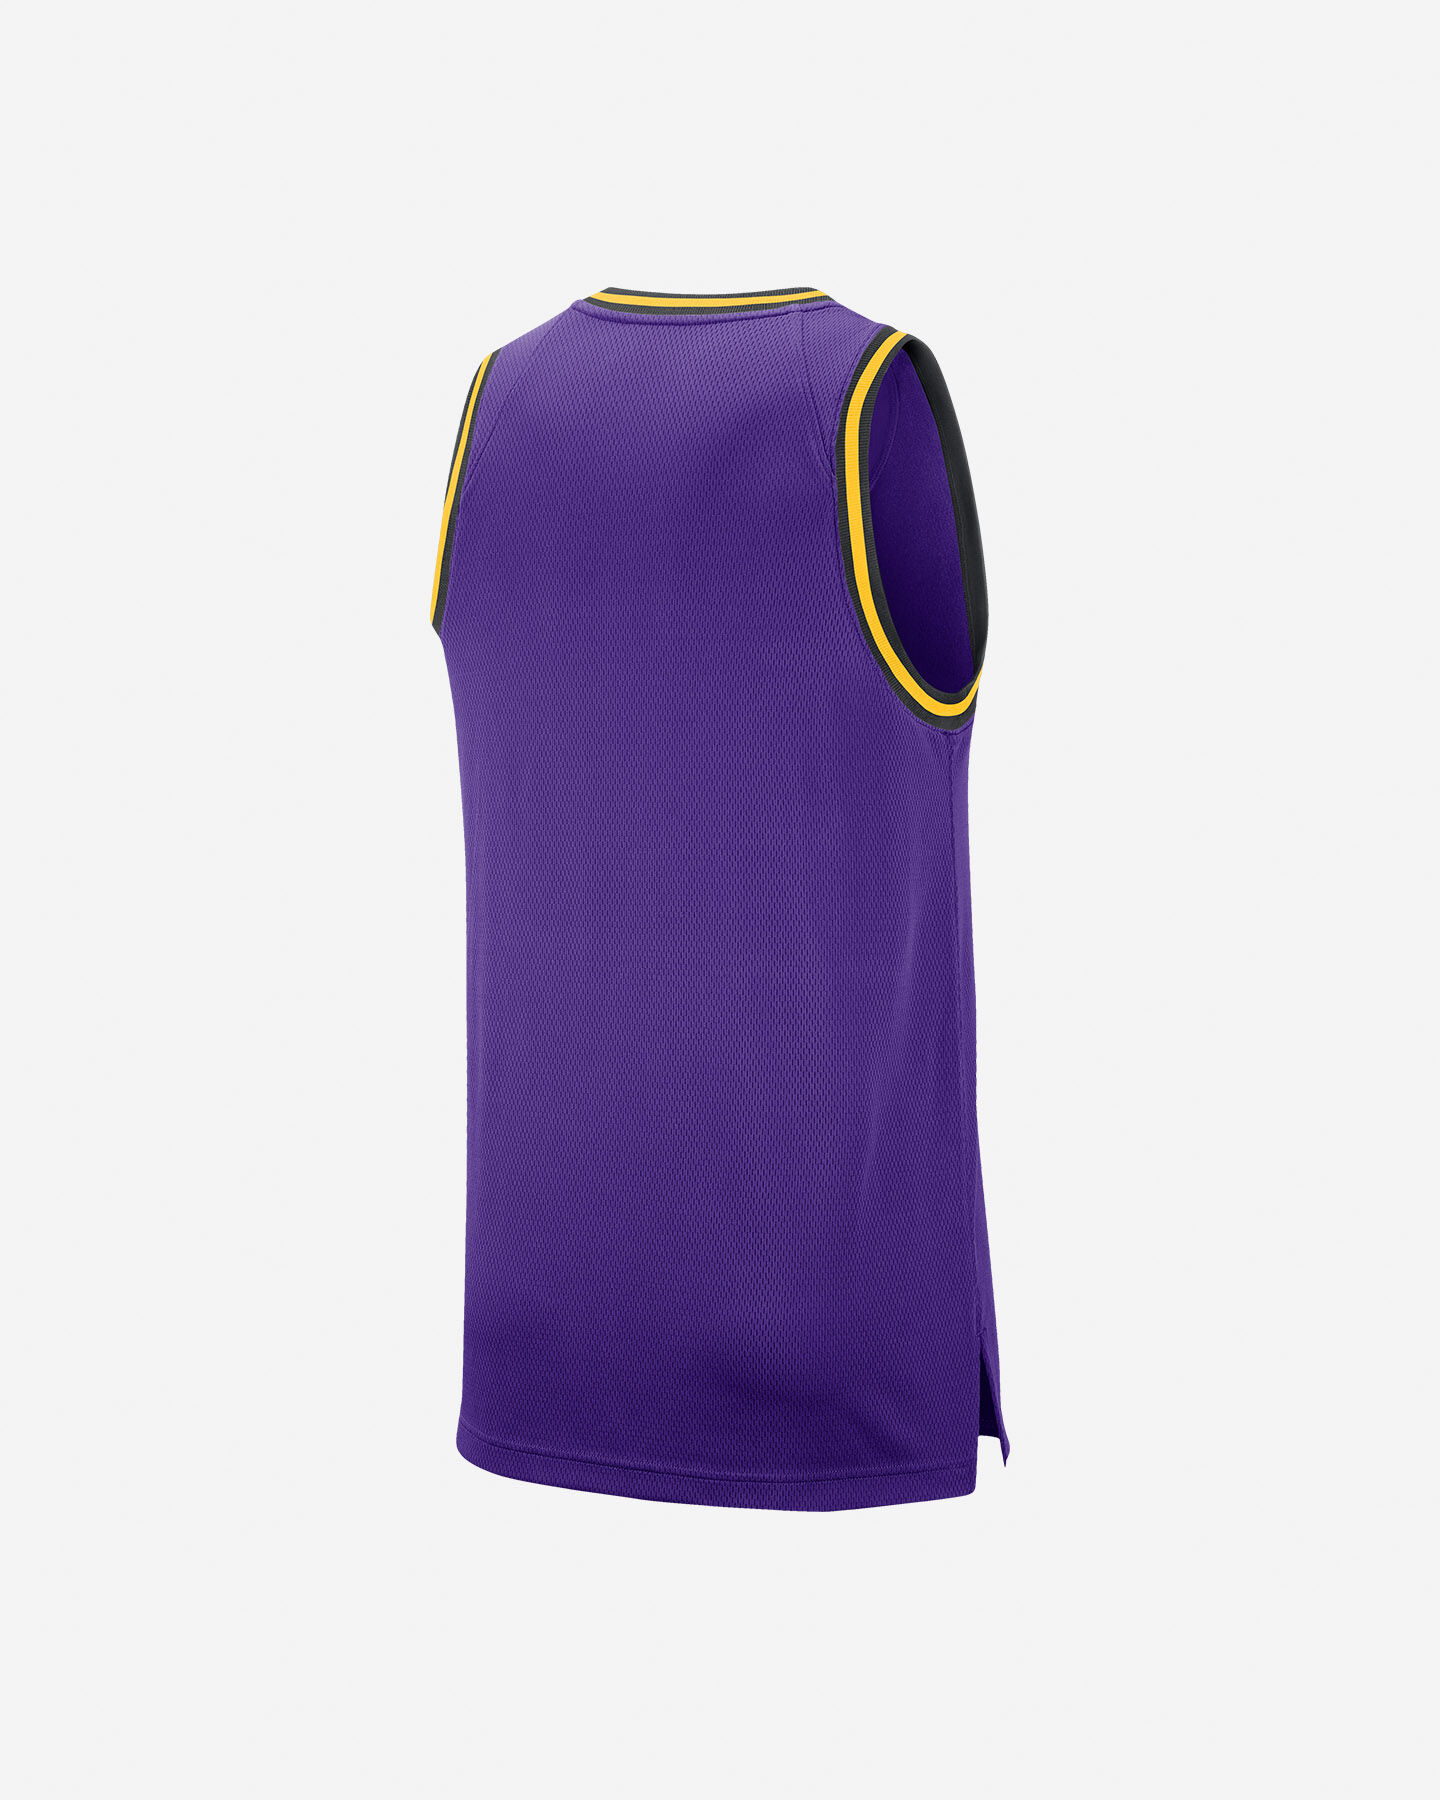  Canotta basket NIKE LOS ANGELES LAKERS DRI-FIT M S5072895|504|S scatto 1